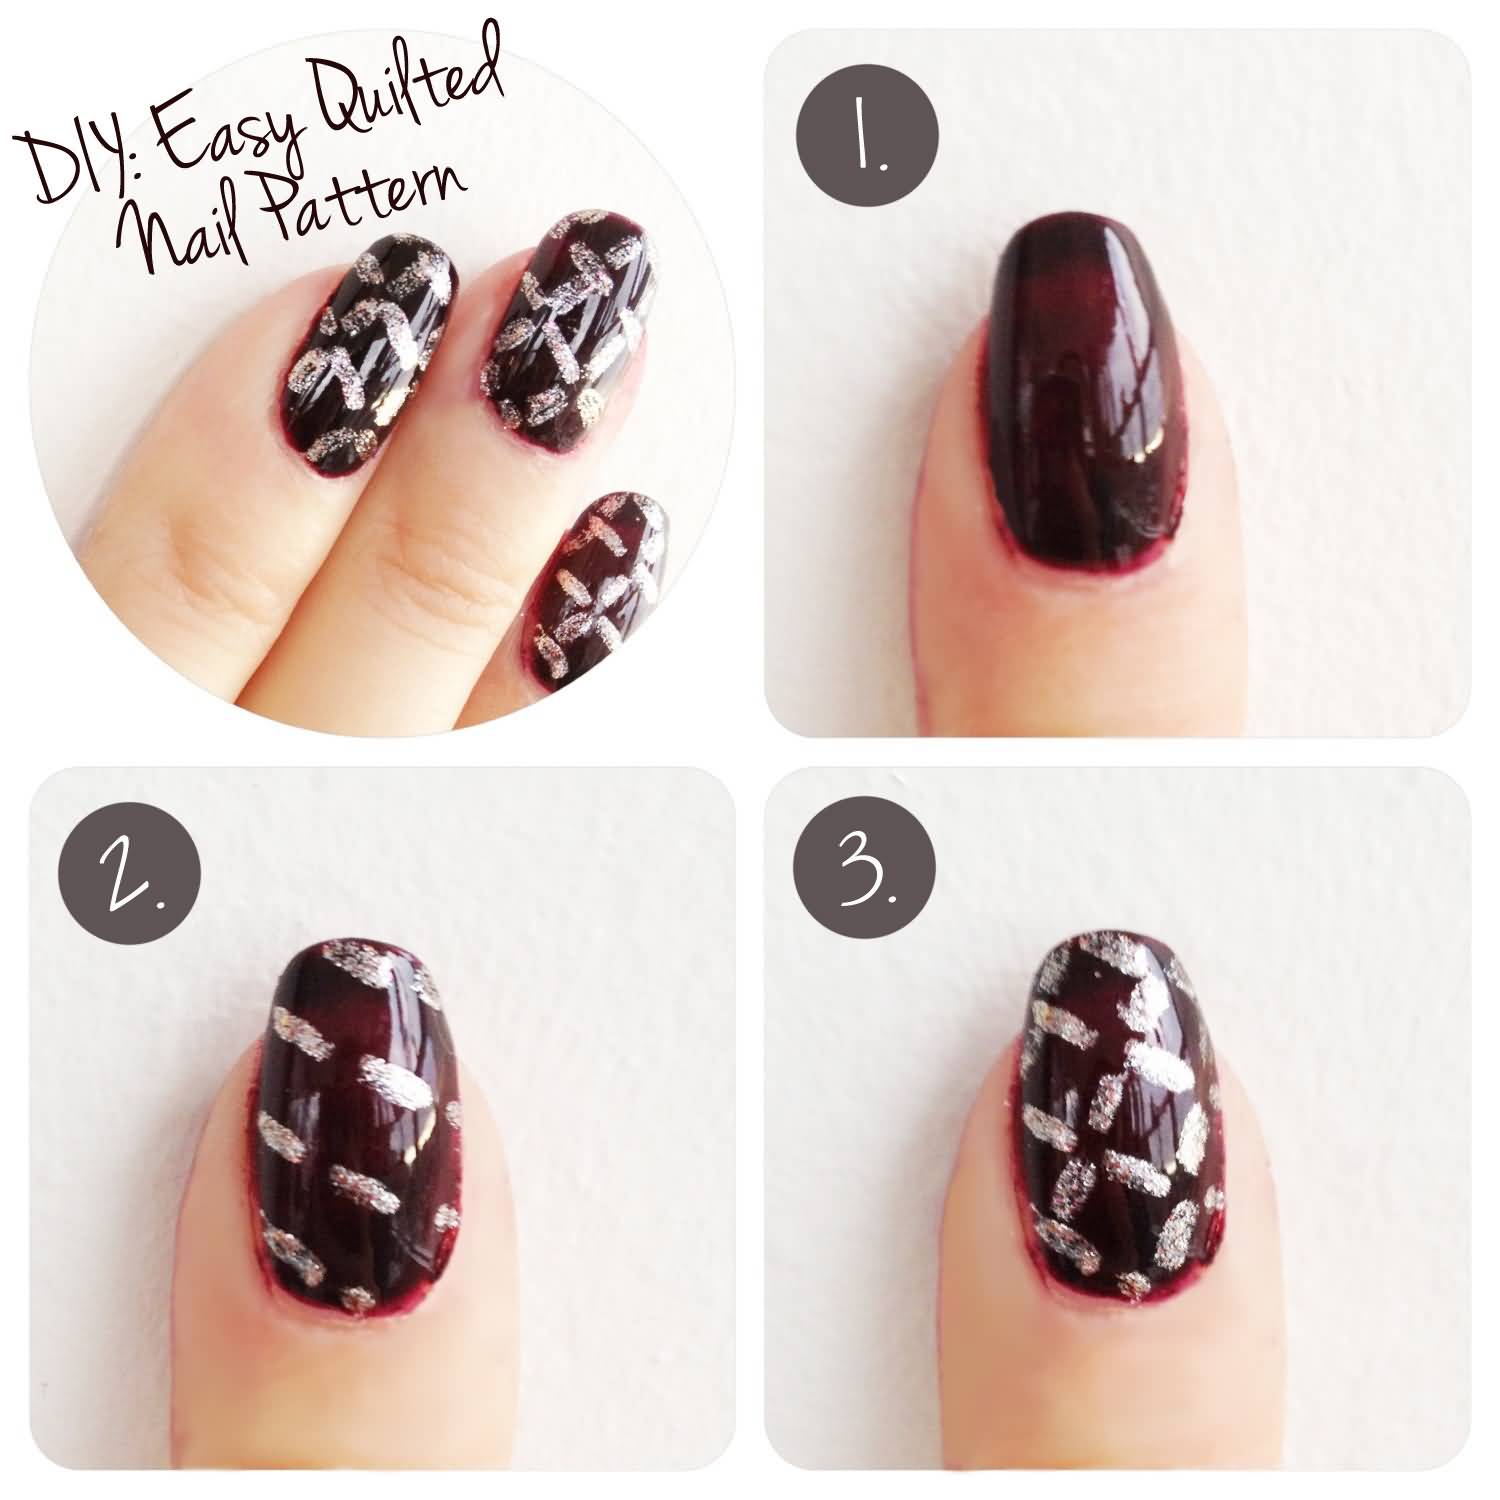 Glossy Brown And Silver Pattern Nail Art Design